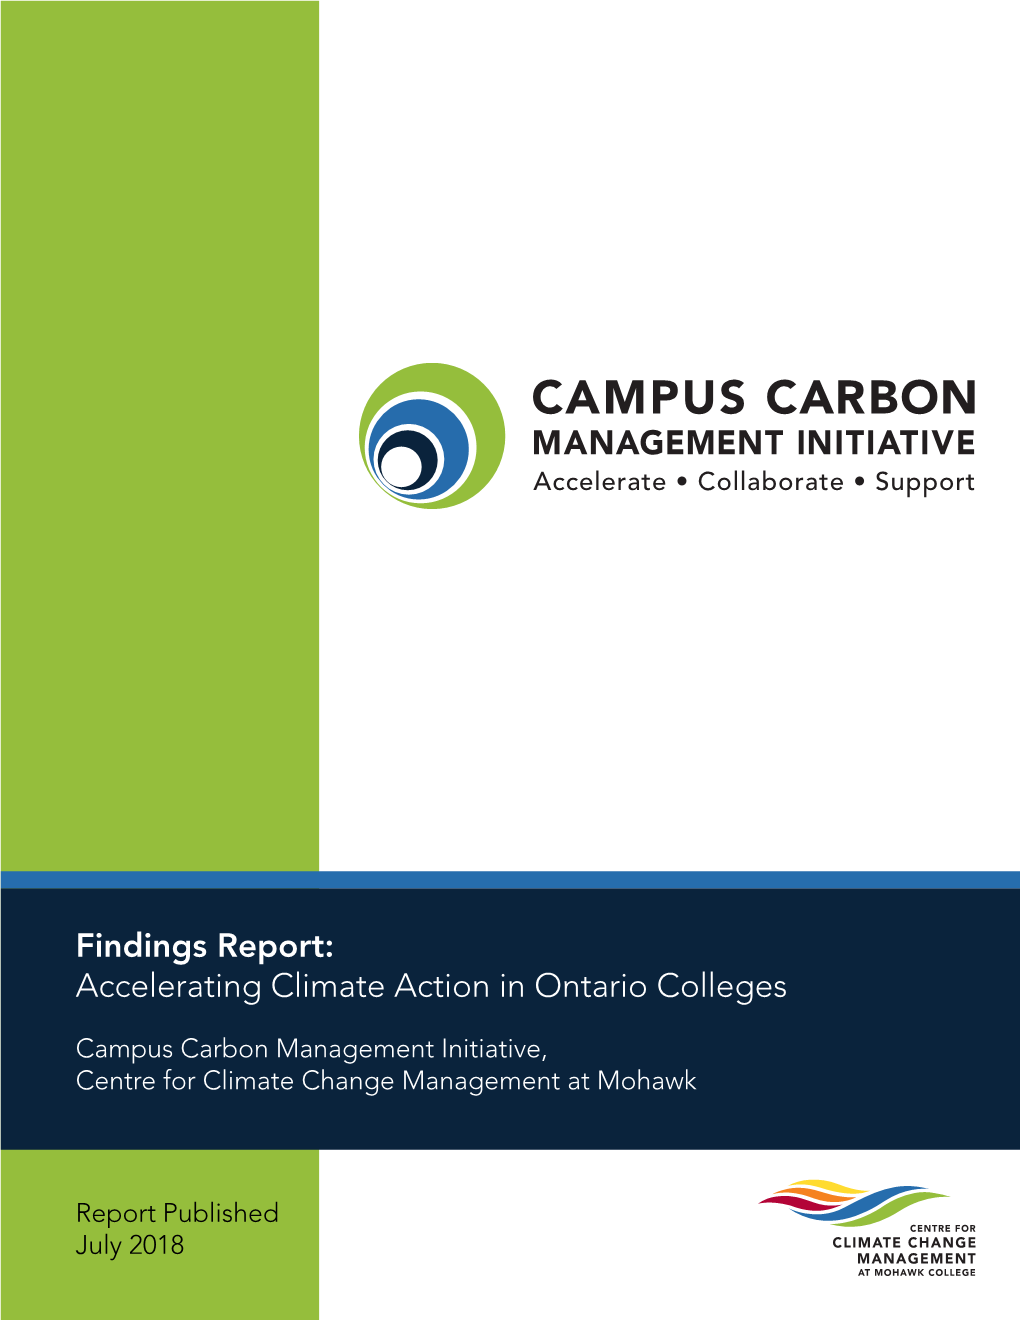 Findings Report: Accelerating Climate Action in Ontario Colleges